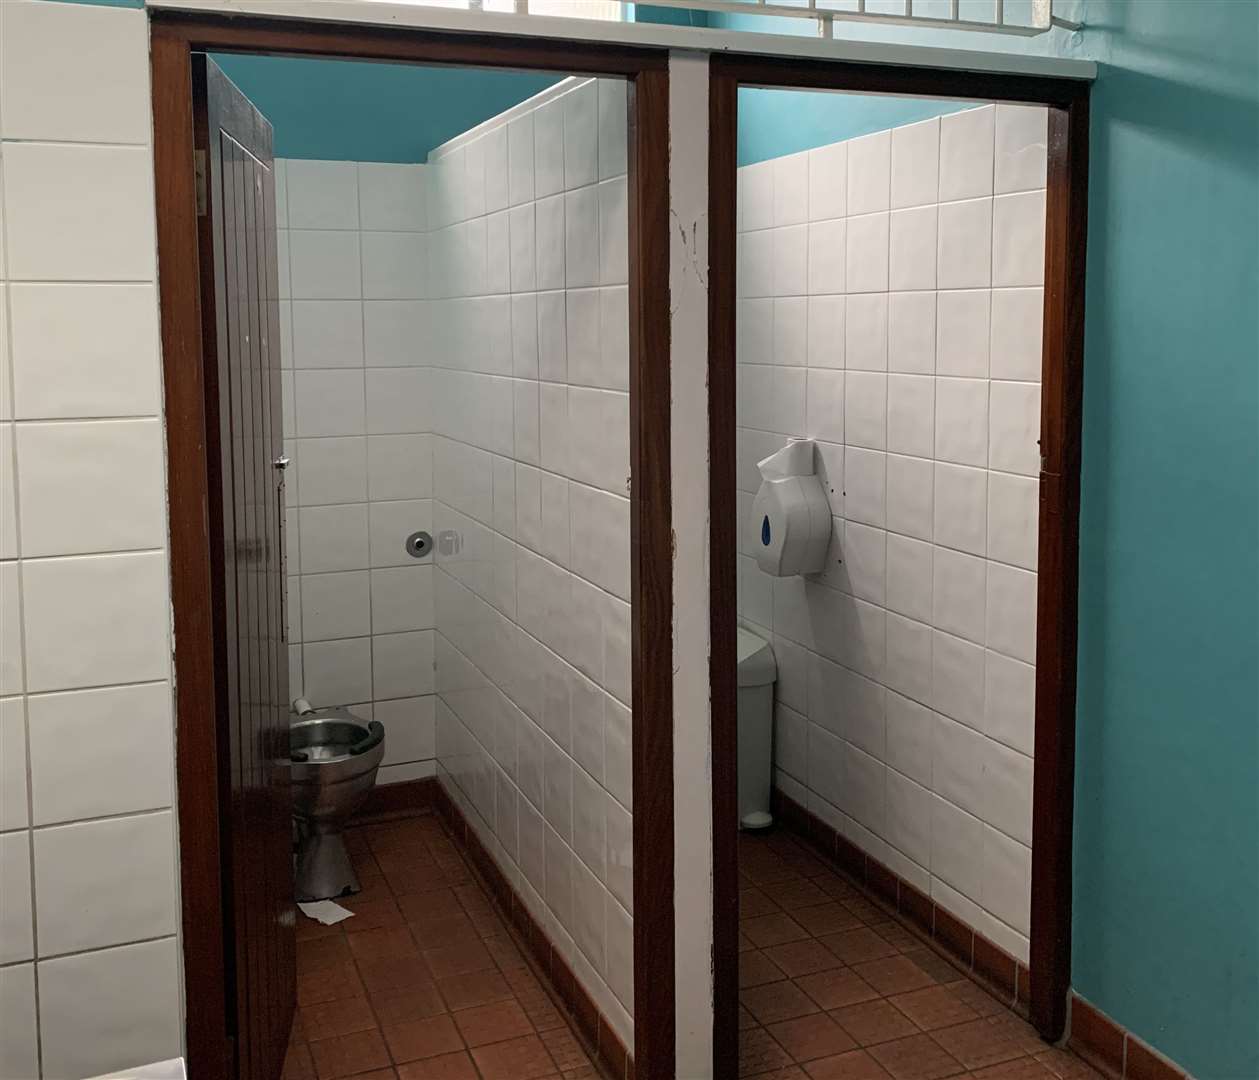 Walmer's public toilets. Dover District Council will open some of its toilets next month